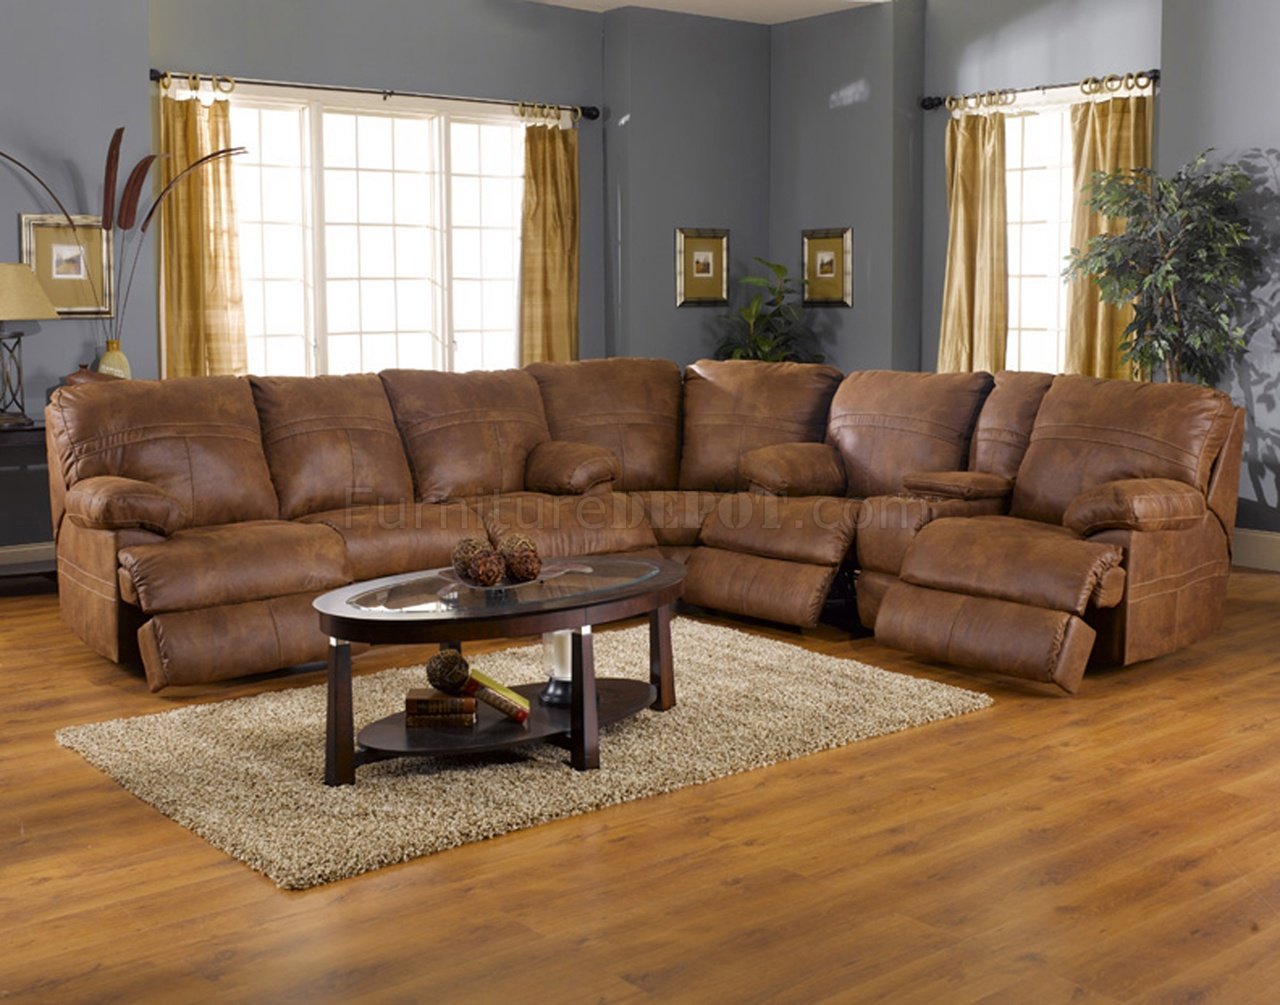 Rich Tanner Faux Leather Fabric Ranger, Faux Leather Sectional Couch